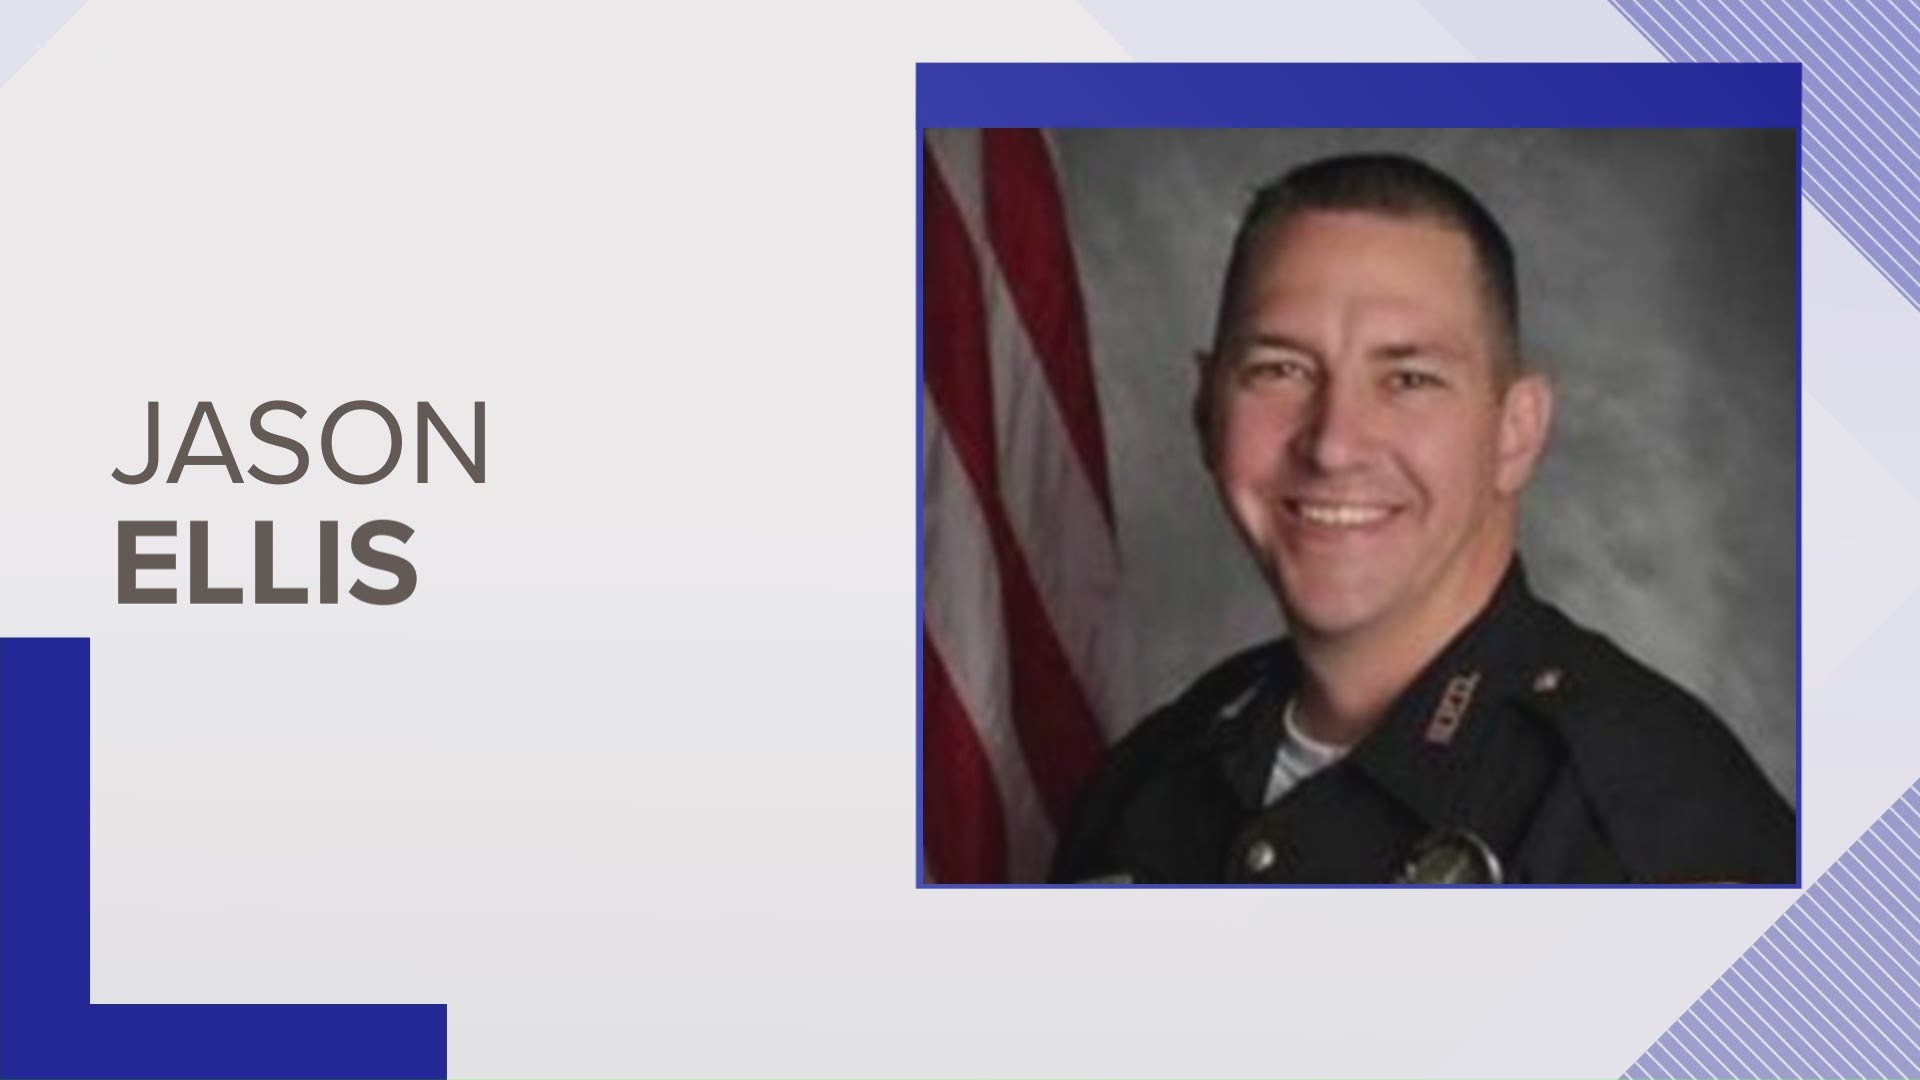 It's been seven years since Officer Jason Ellis was murdered as he was headed home after finishing his shift.